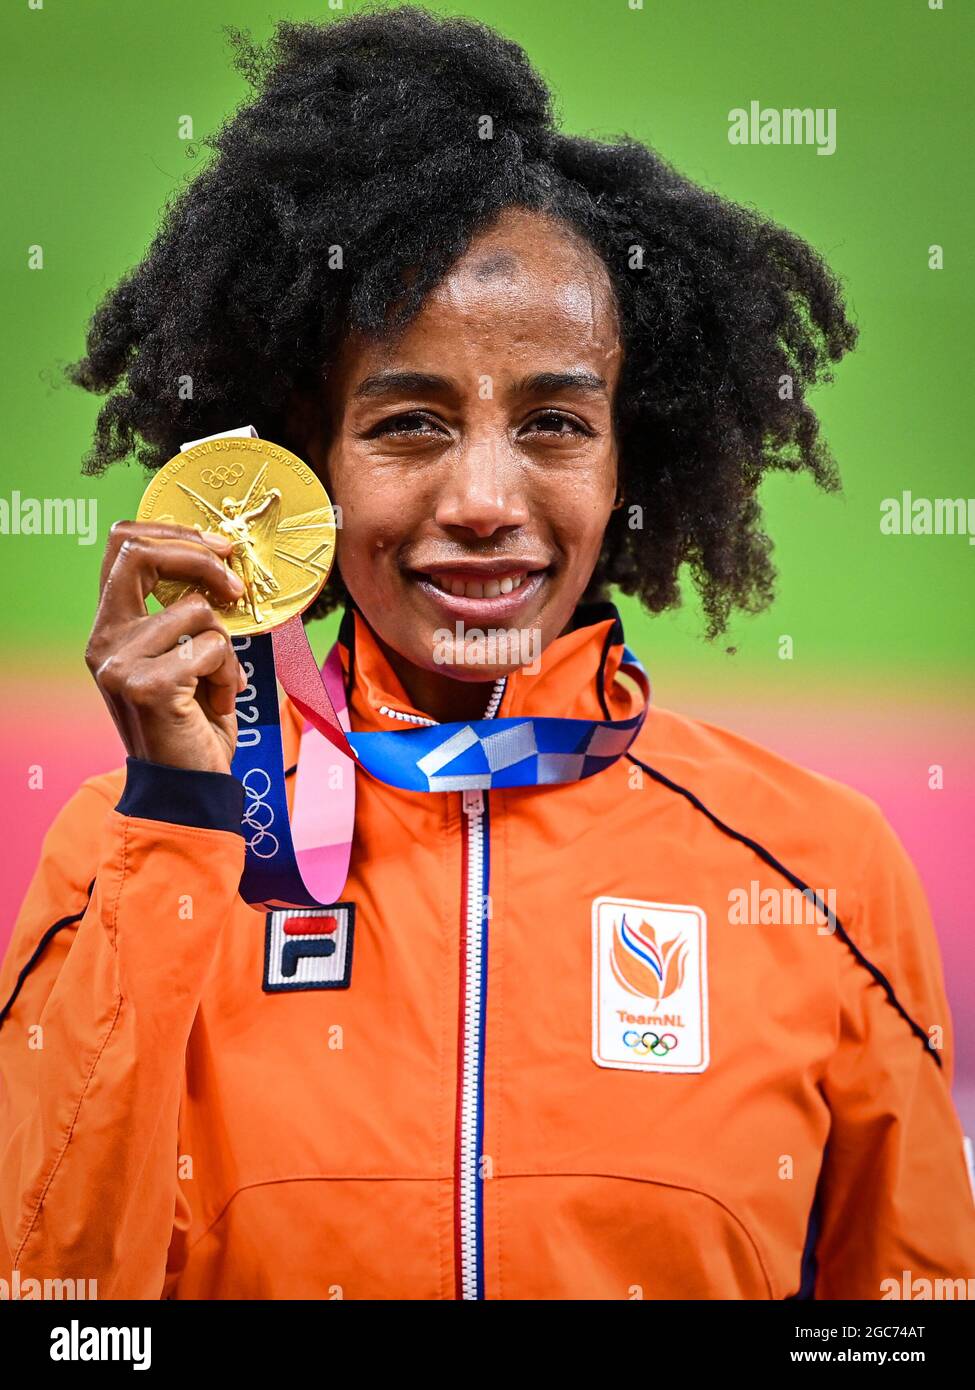 Tokyo, Japan. 07th Aug, 2021. Tokyo, Japan. 07th Aug, 2021. TOKYO, JAPAN - AUGUST 7: Sifan Hassan of the Netherlands poses with her golden medal during the Medal Ceremony of Athletics during the Tokyo 2020 Olympic Games at the Olympic Stadium on August 7, 2021 in Tokyo, Japan (Photo by Andy Astfalck/Orange Pictures) NOCNSF ATLETIEKUNIE Credit: Orange Pics BV/Alamy Live News Credit: Orange Pics BV/Alamy Live News Stock Photo